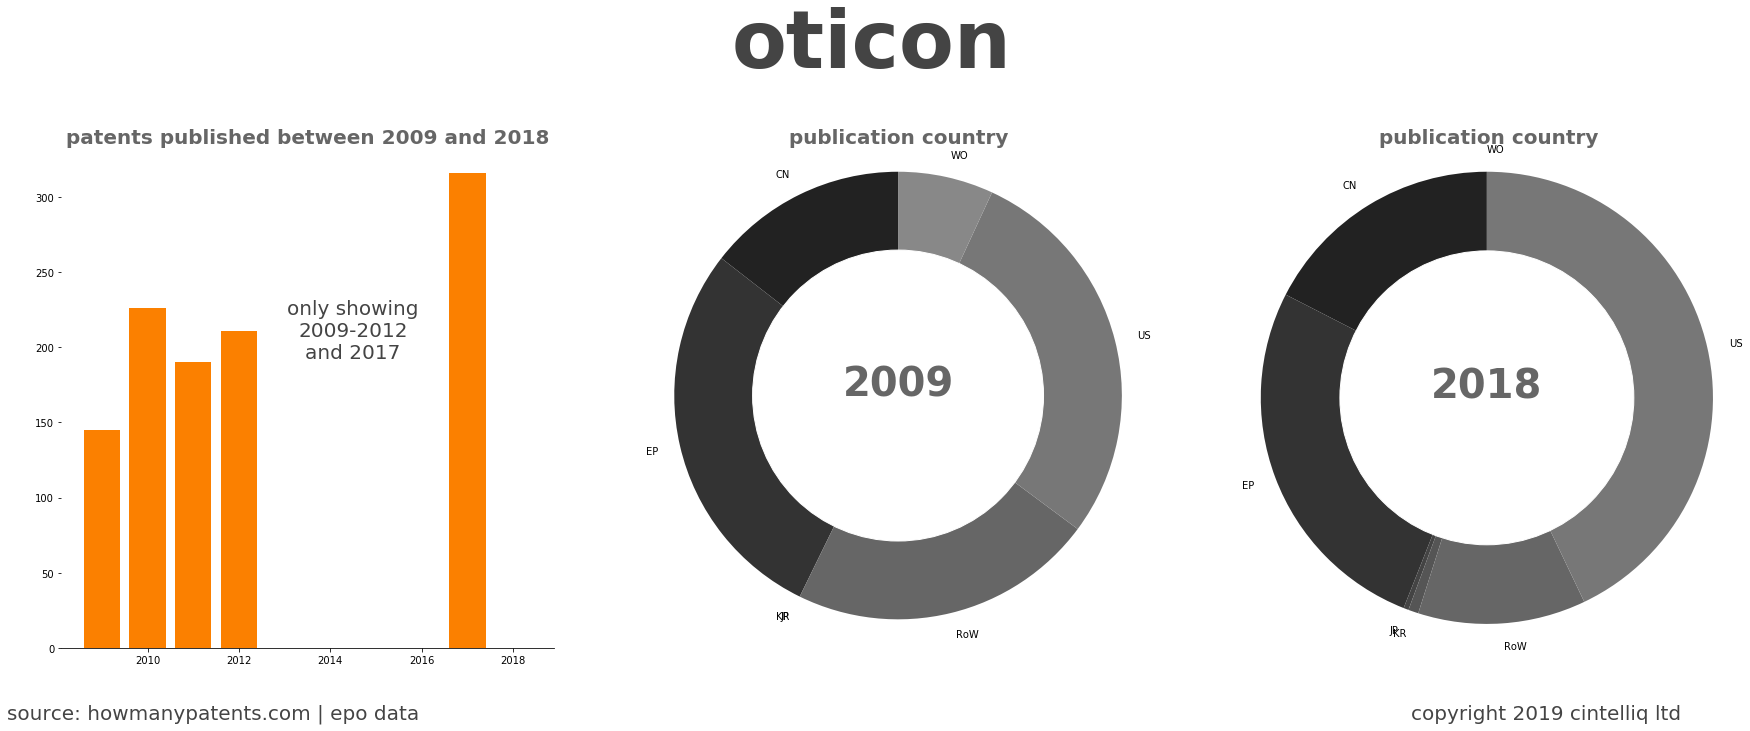 summary of patents for Oticon